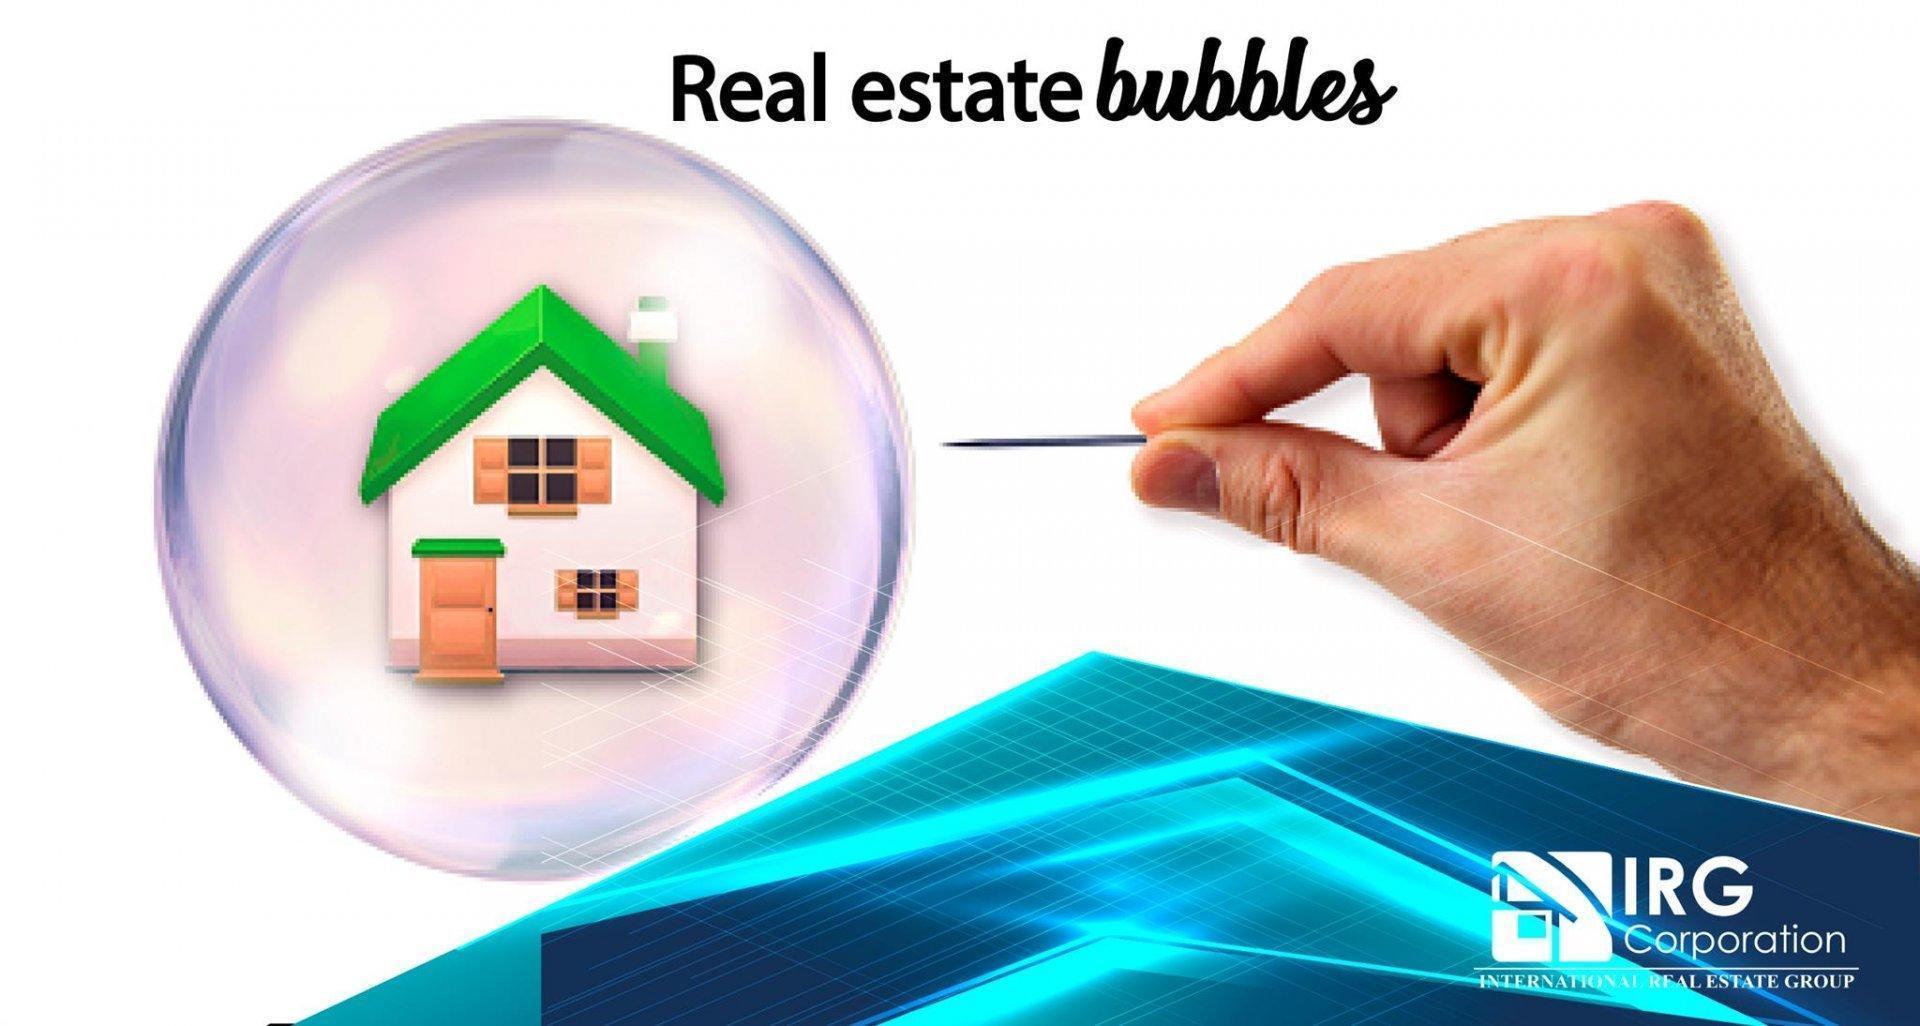 How do real estate bubbles form